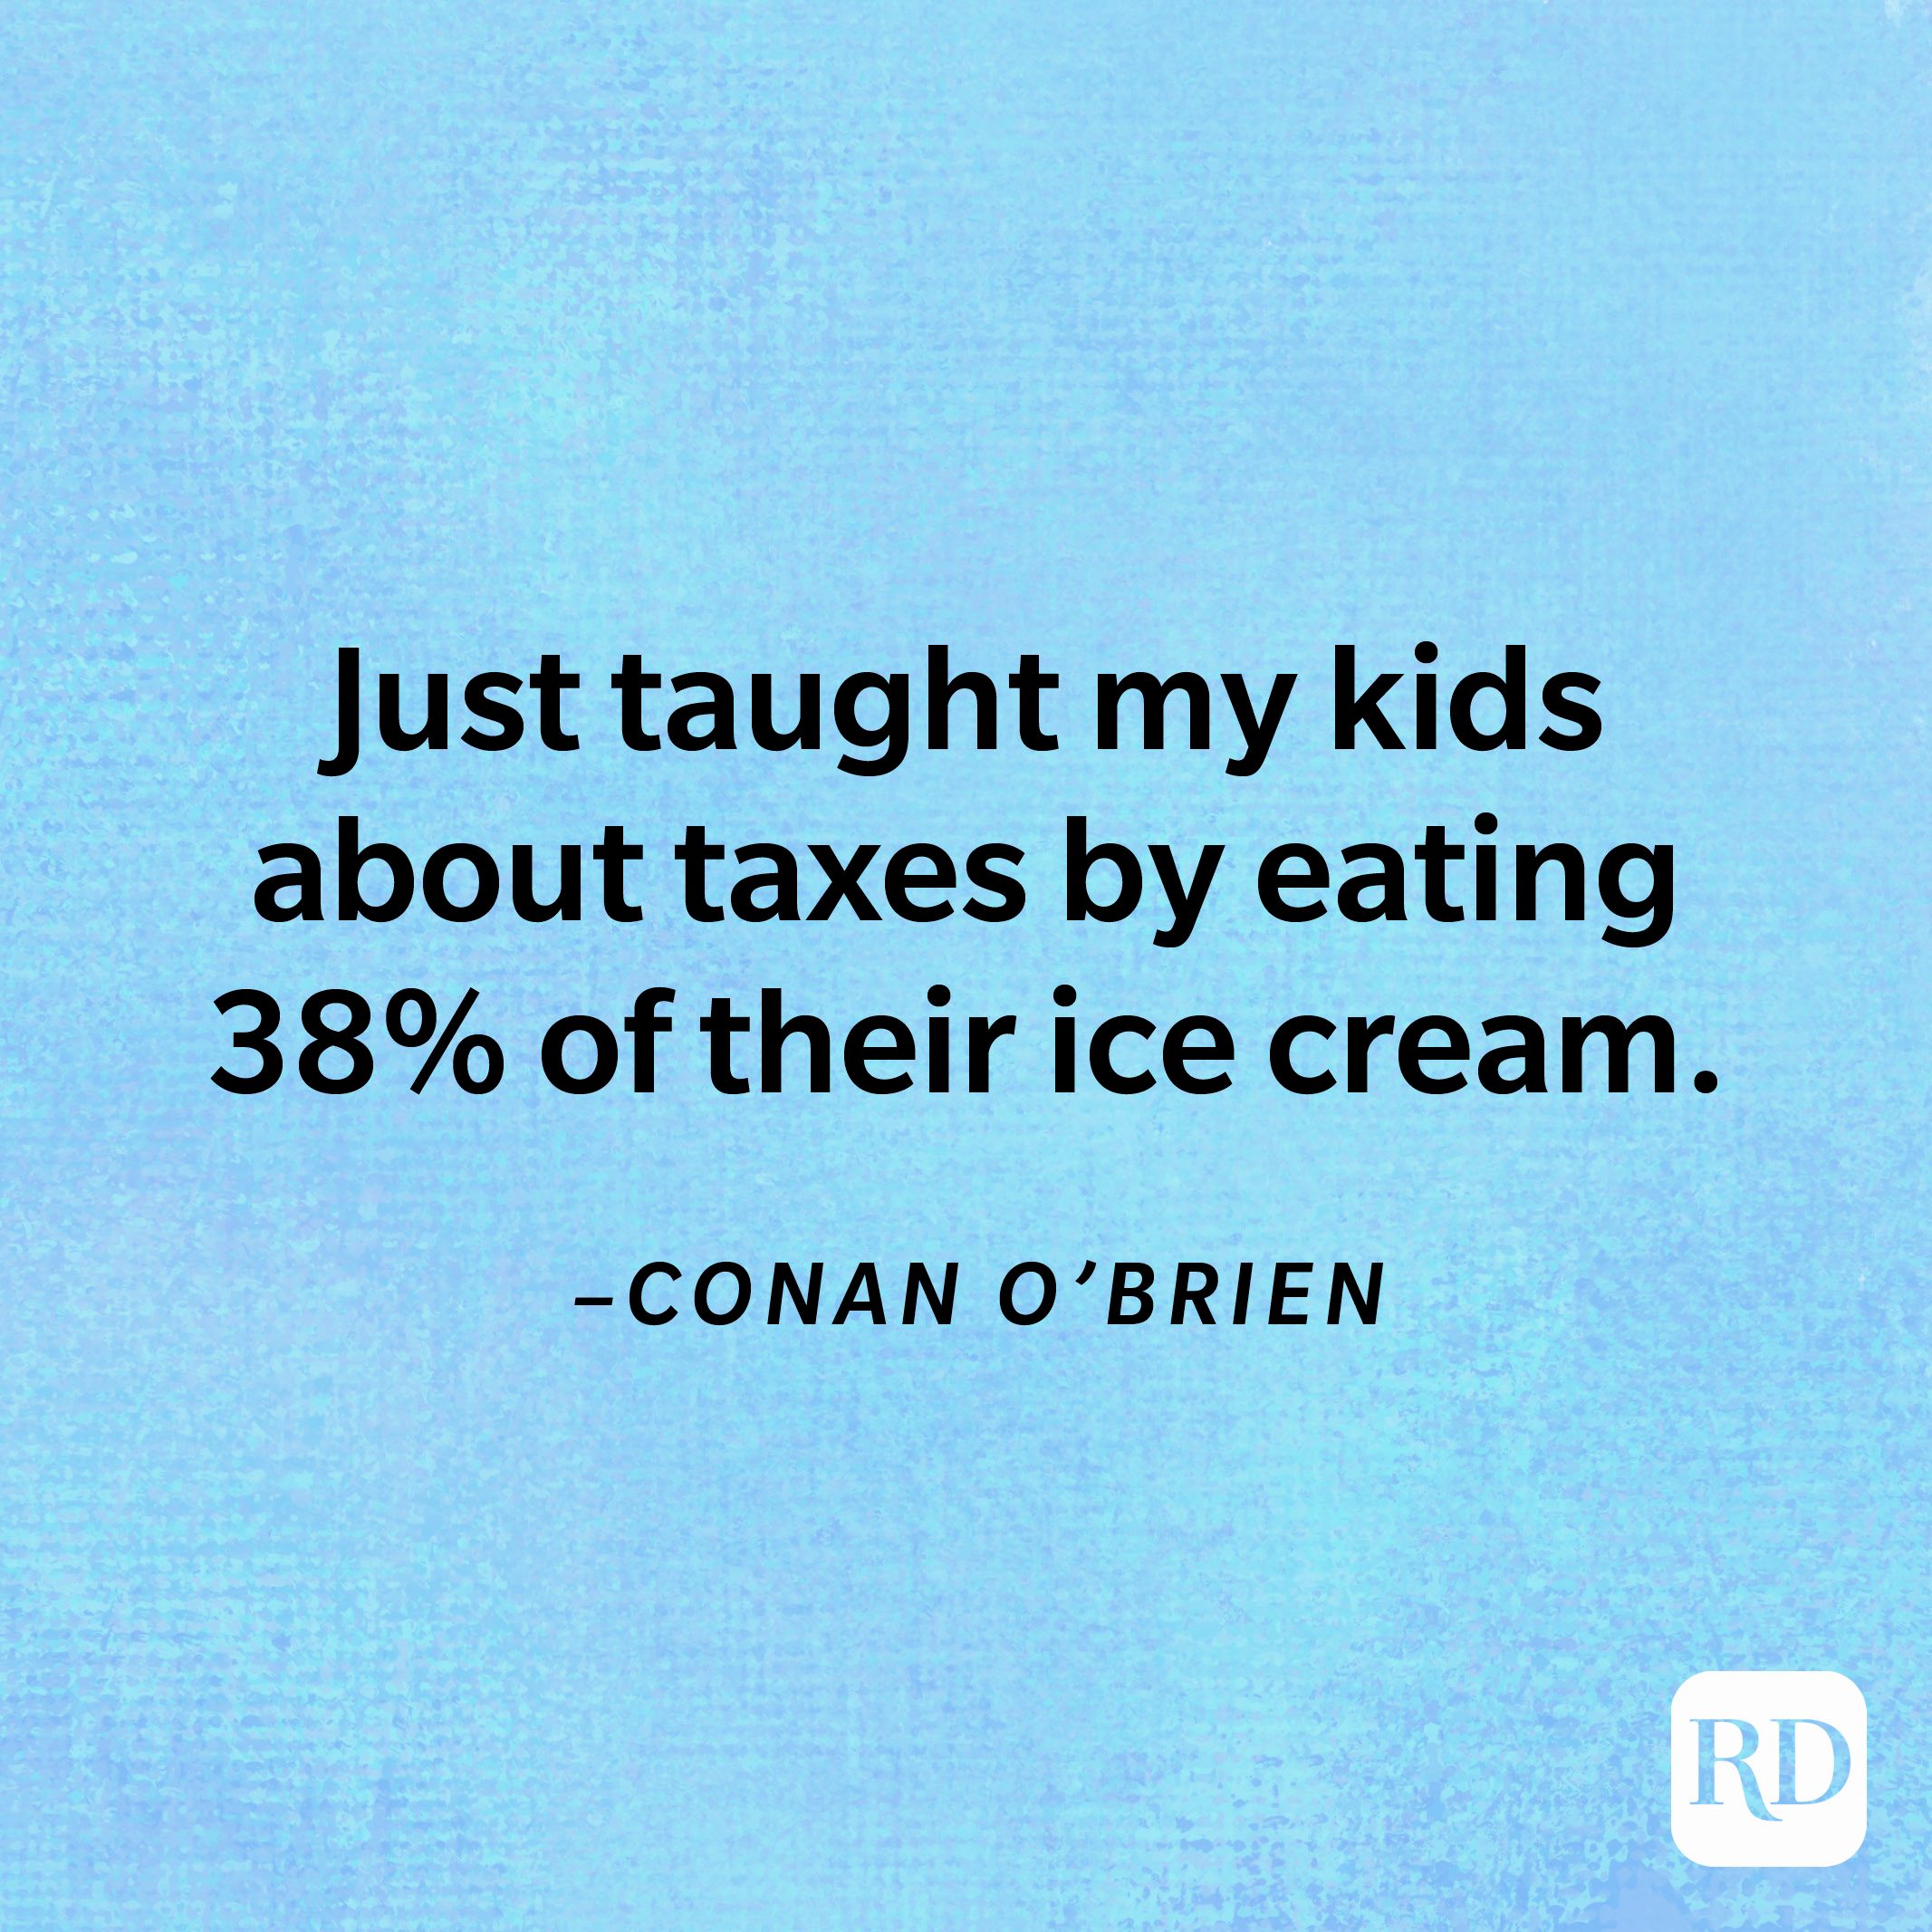 “Just taught my kids about taxes by eating 38% of their ice cream.”—Conan O'Brien